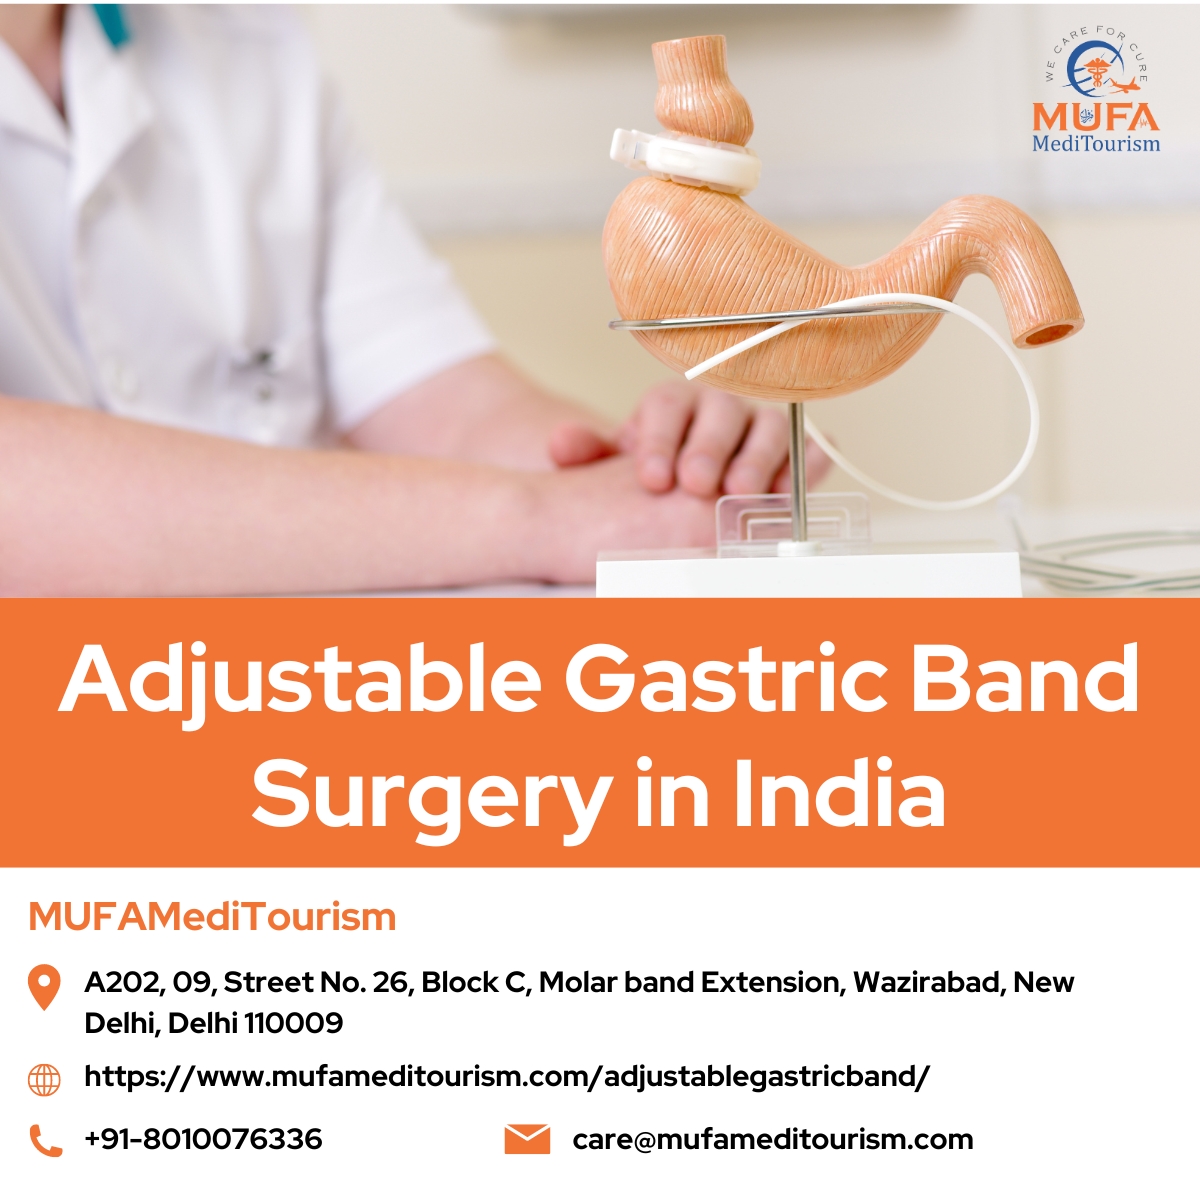  Experience Safe and Effective Weight Loss with Adjustable Gastric Band Surgery in India - MUFAMediTourism